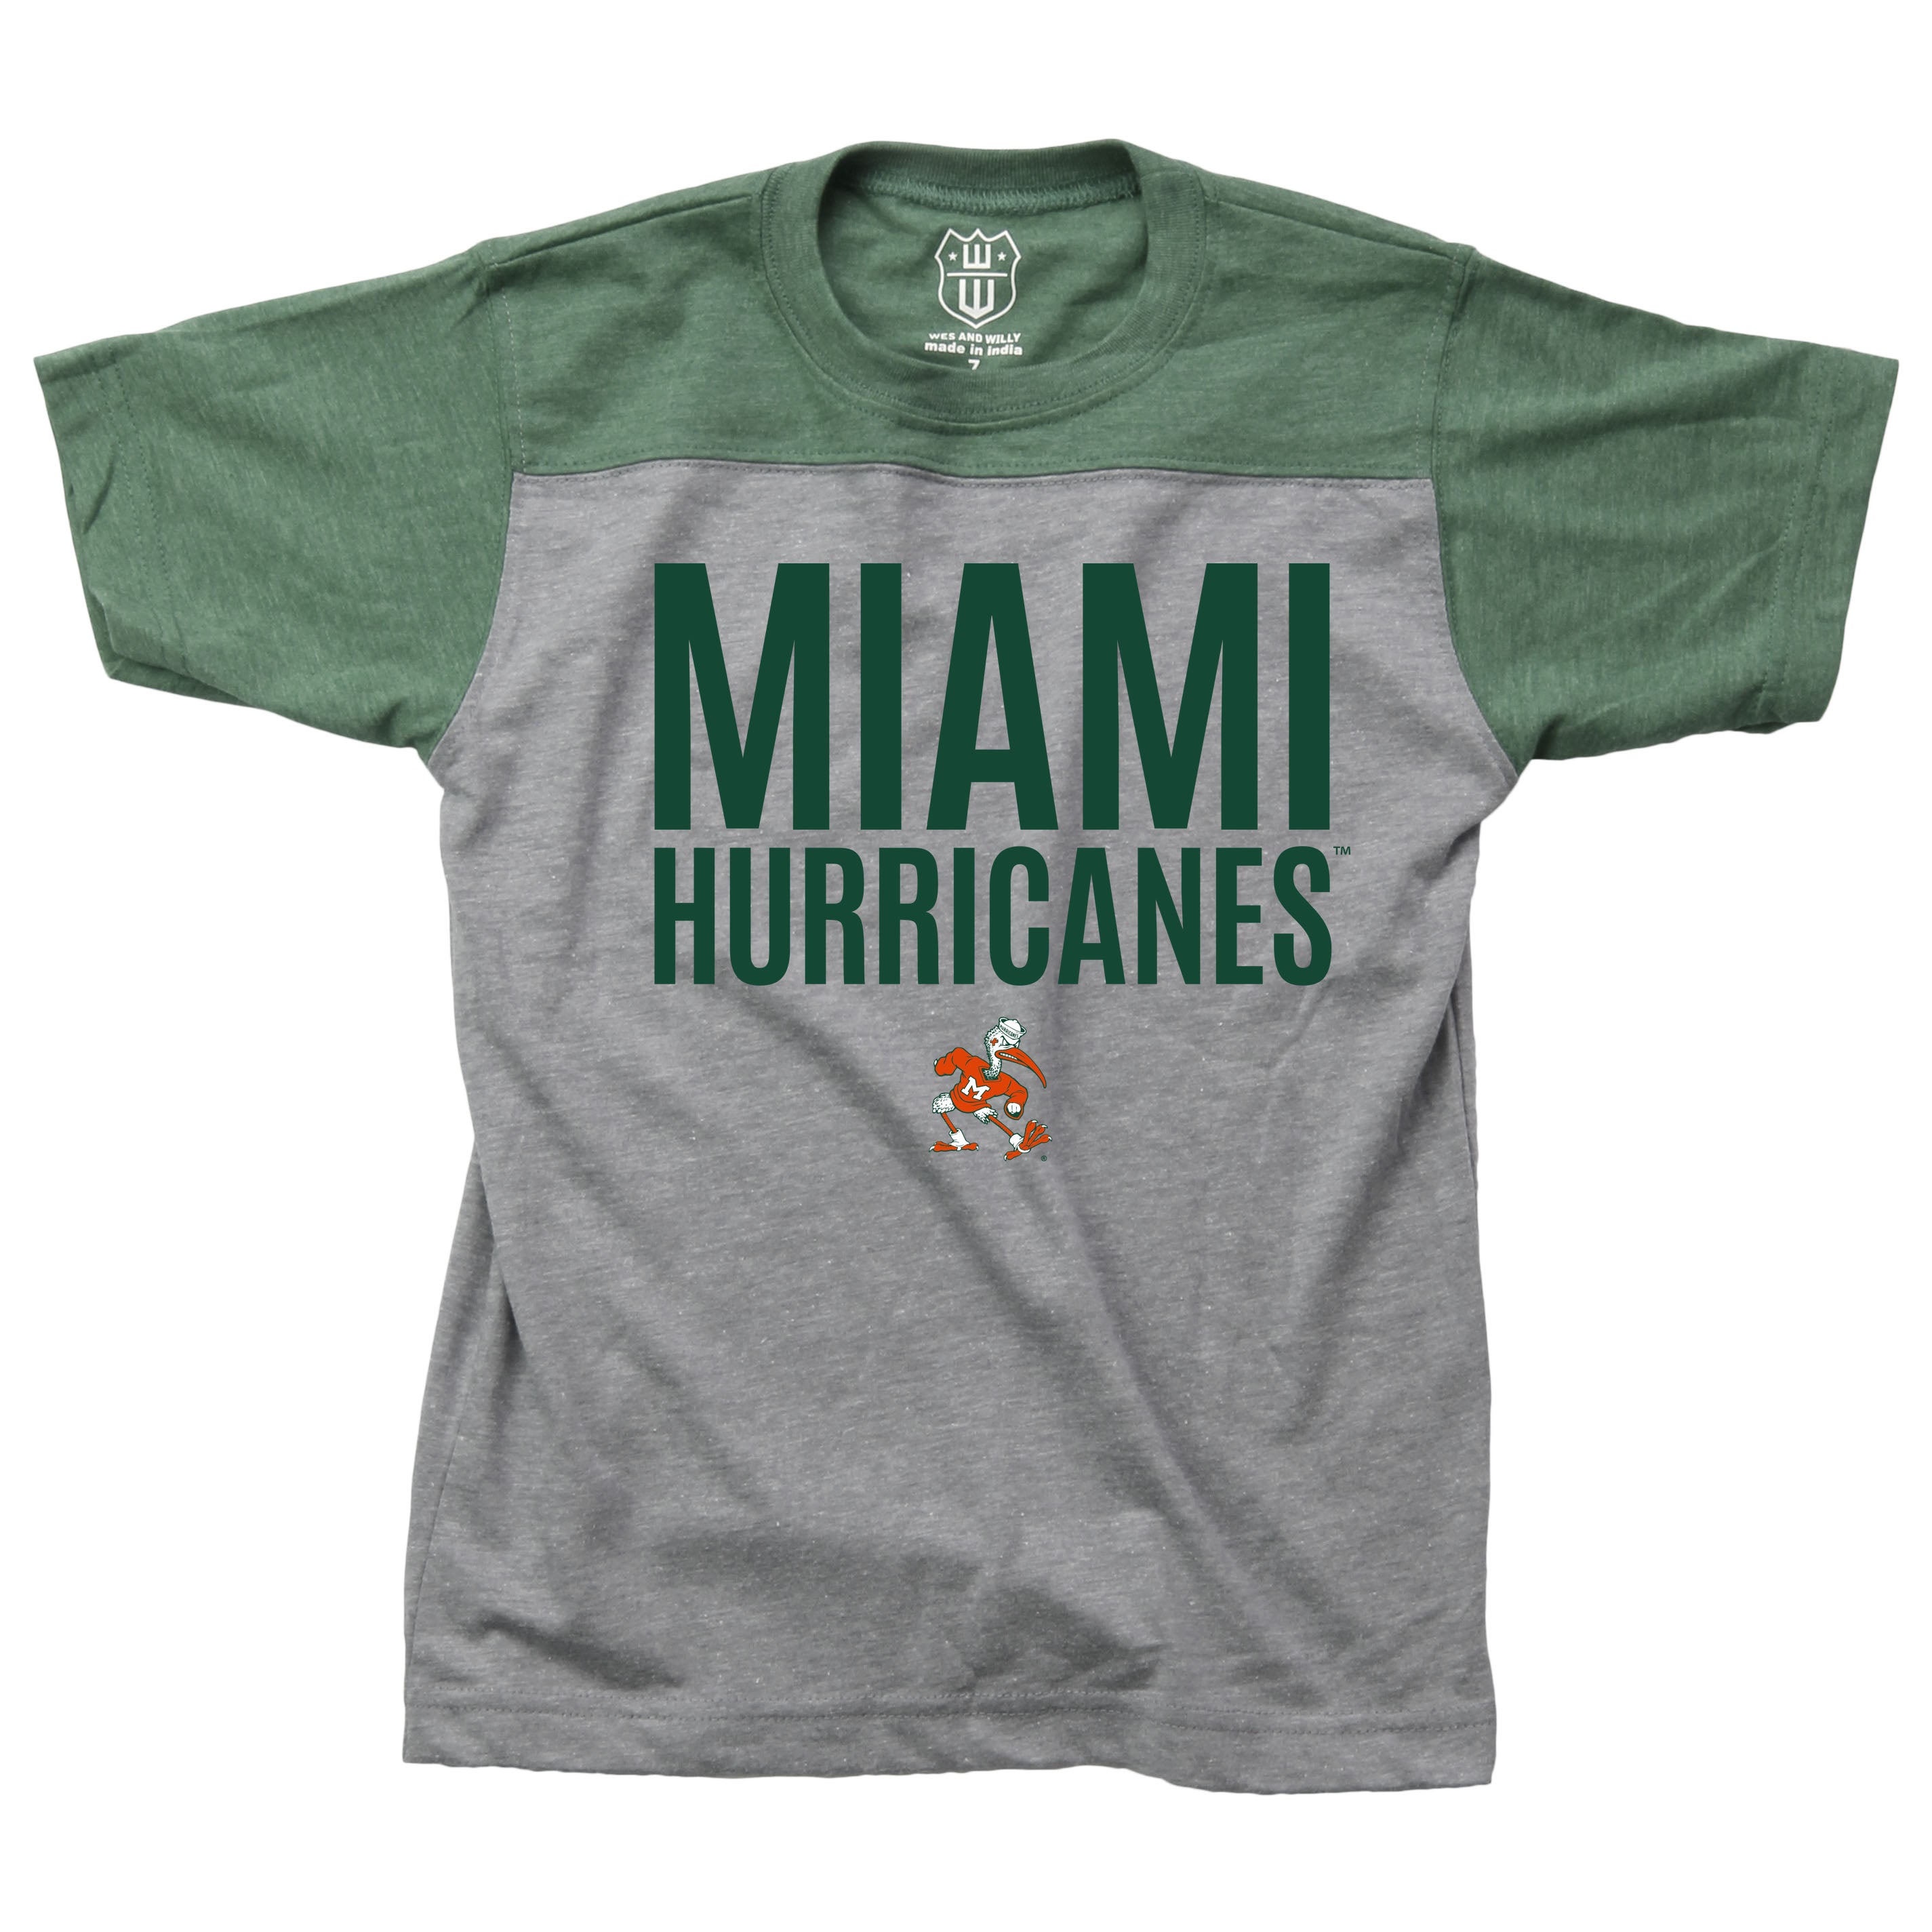 Miami Hurricanes Wes And Willy Youth Yoke Raglan Tri-Blend T-Shirt - Heather Green / Grey